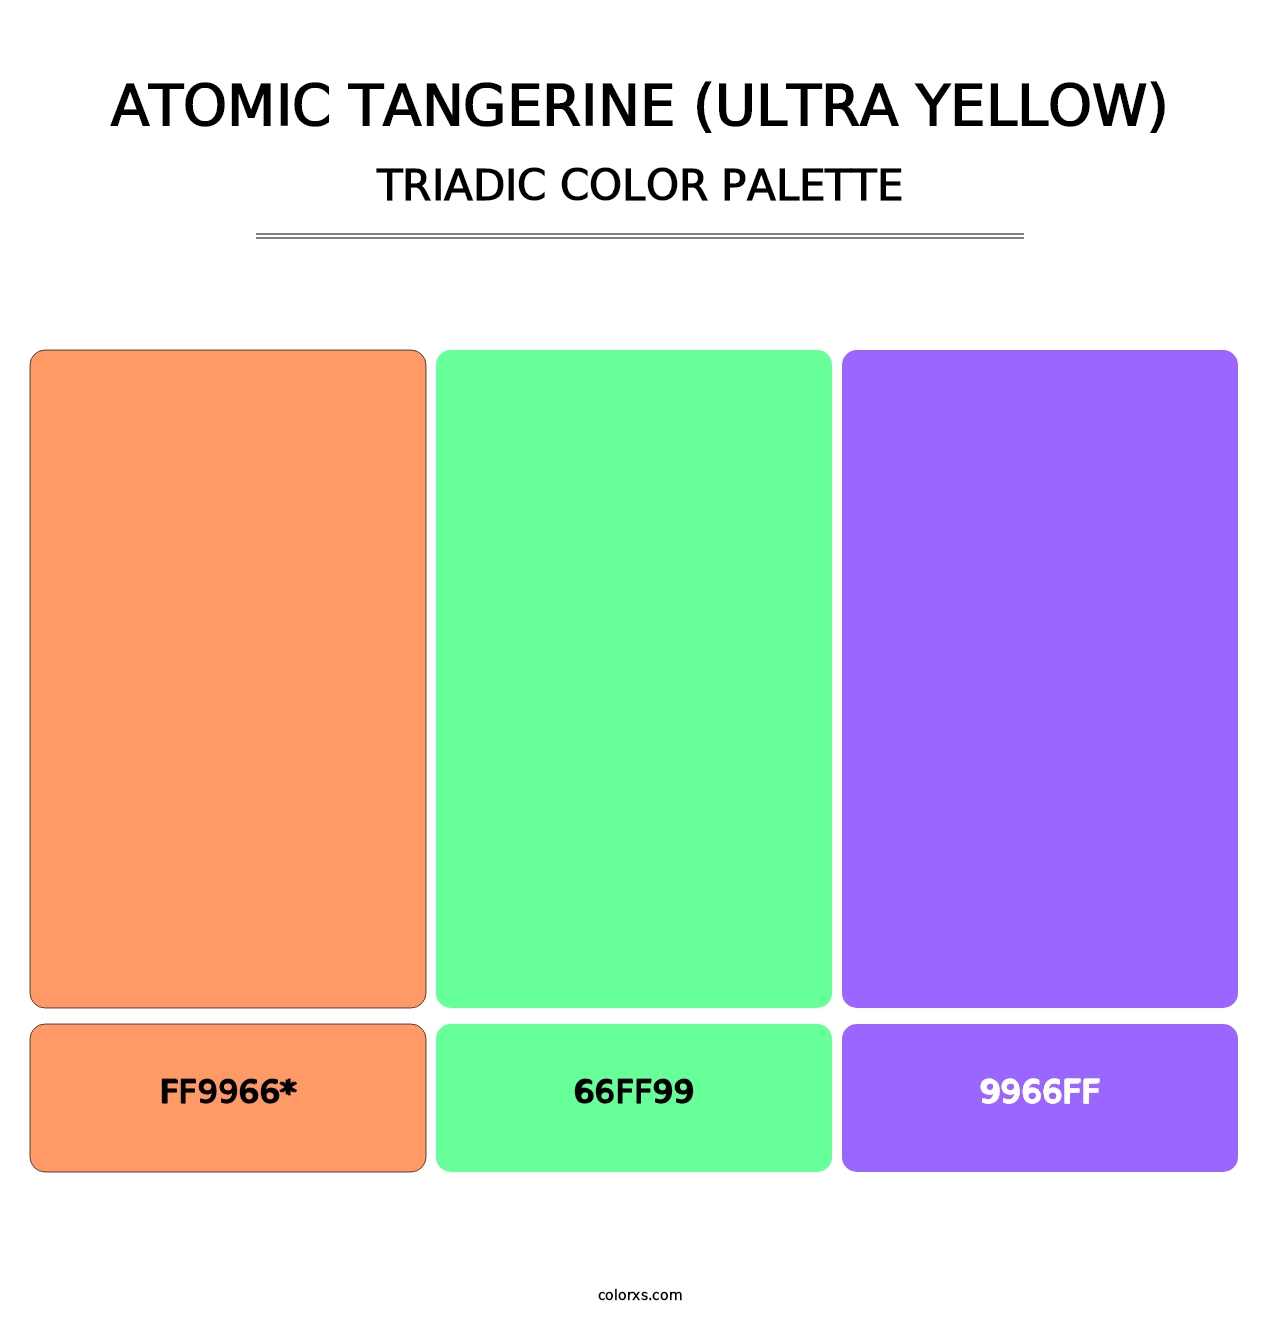 Atomic Tangerine (Ultra Yellow) - Triadic Color Palette